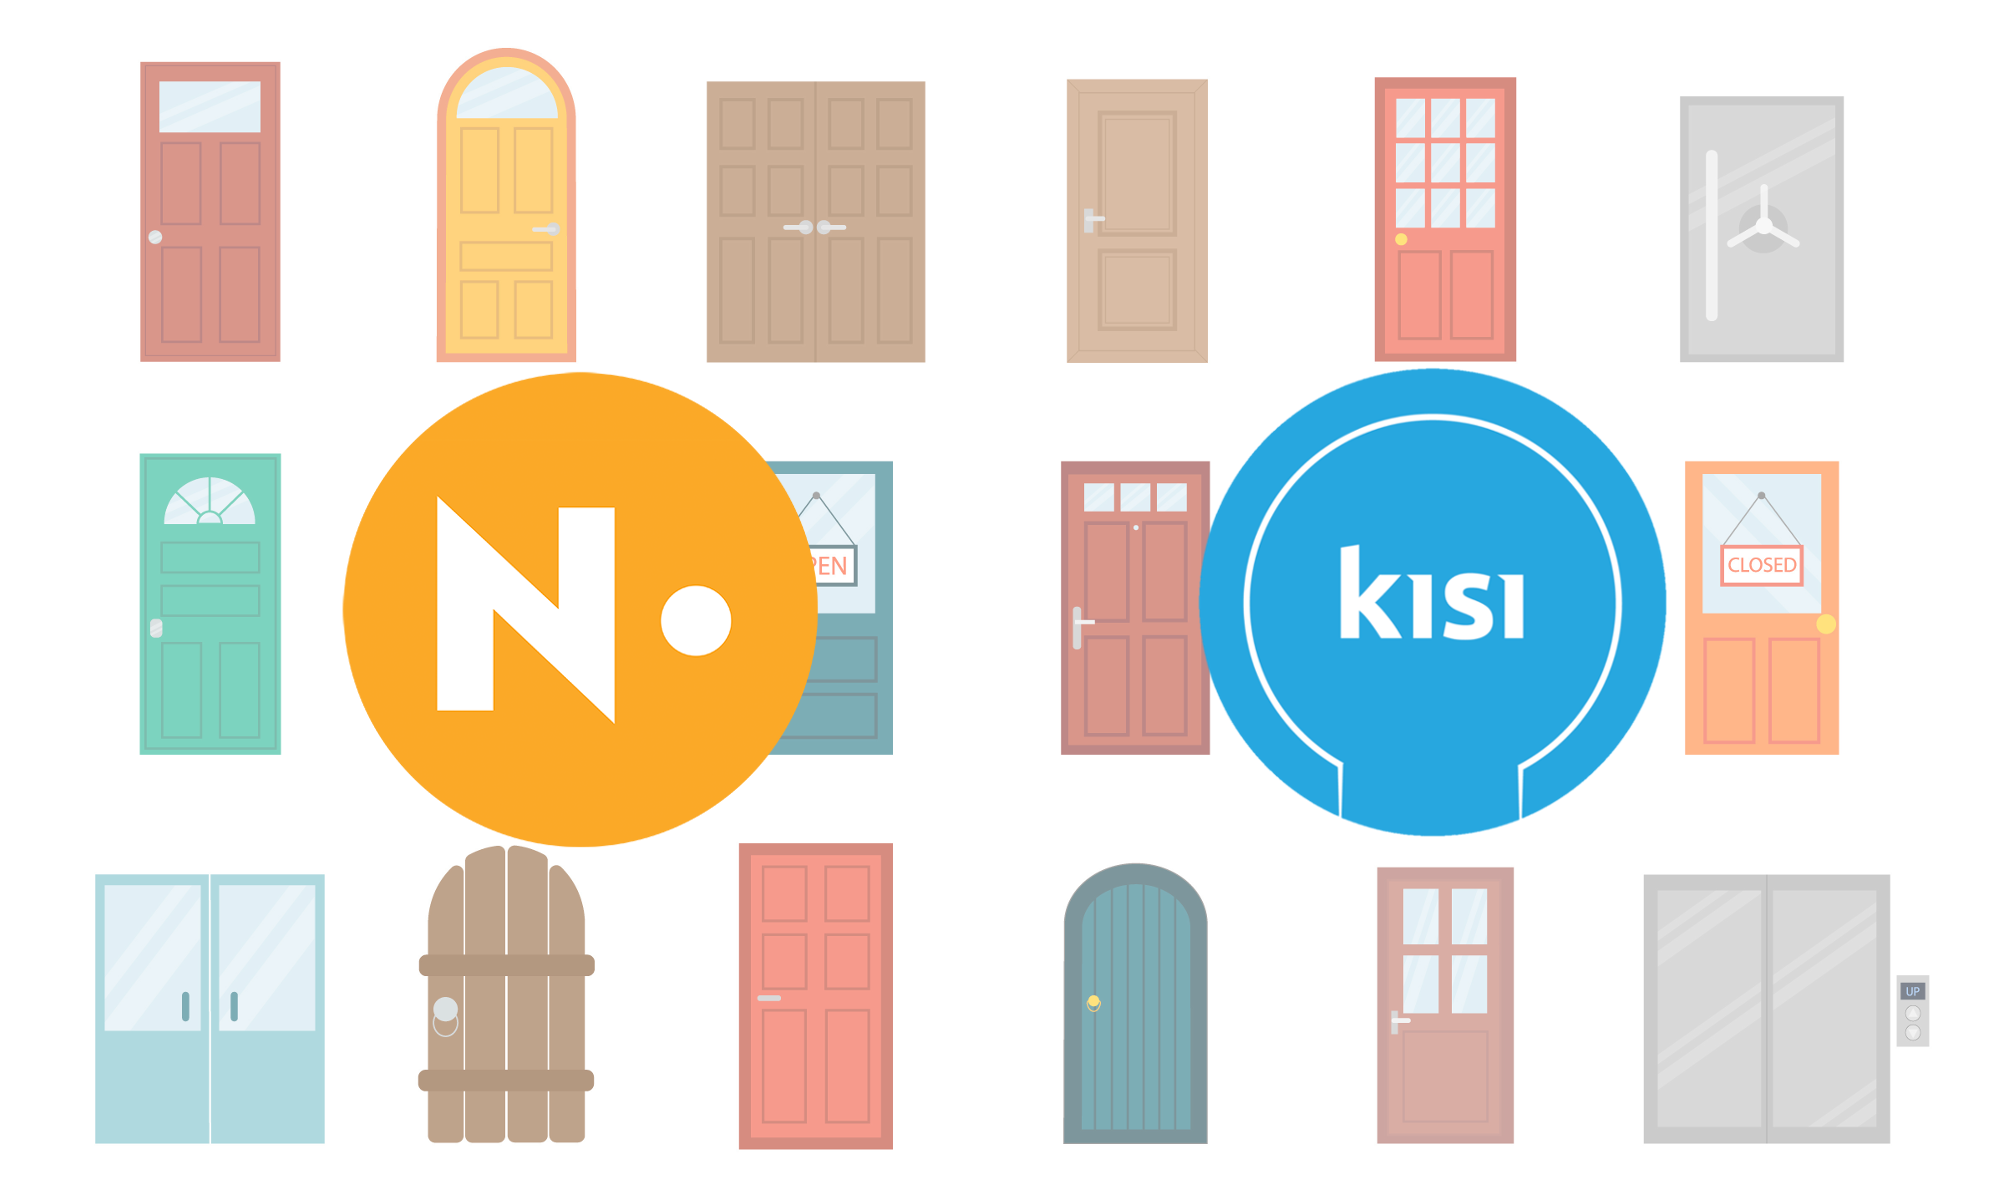 Controlling access to your coworking space just got easier with KISI